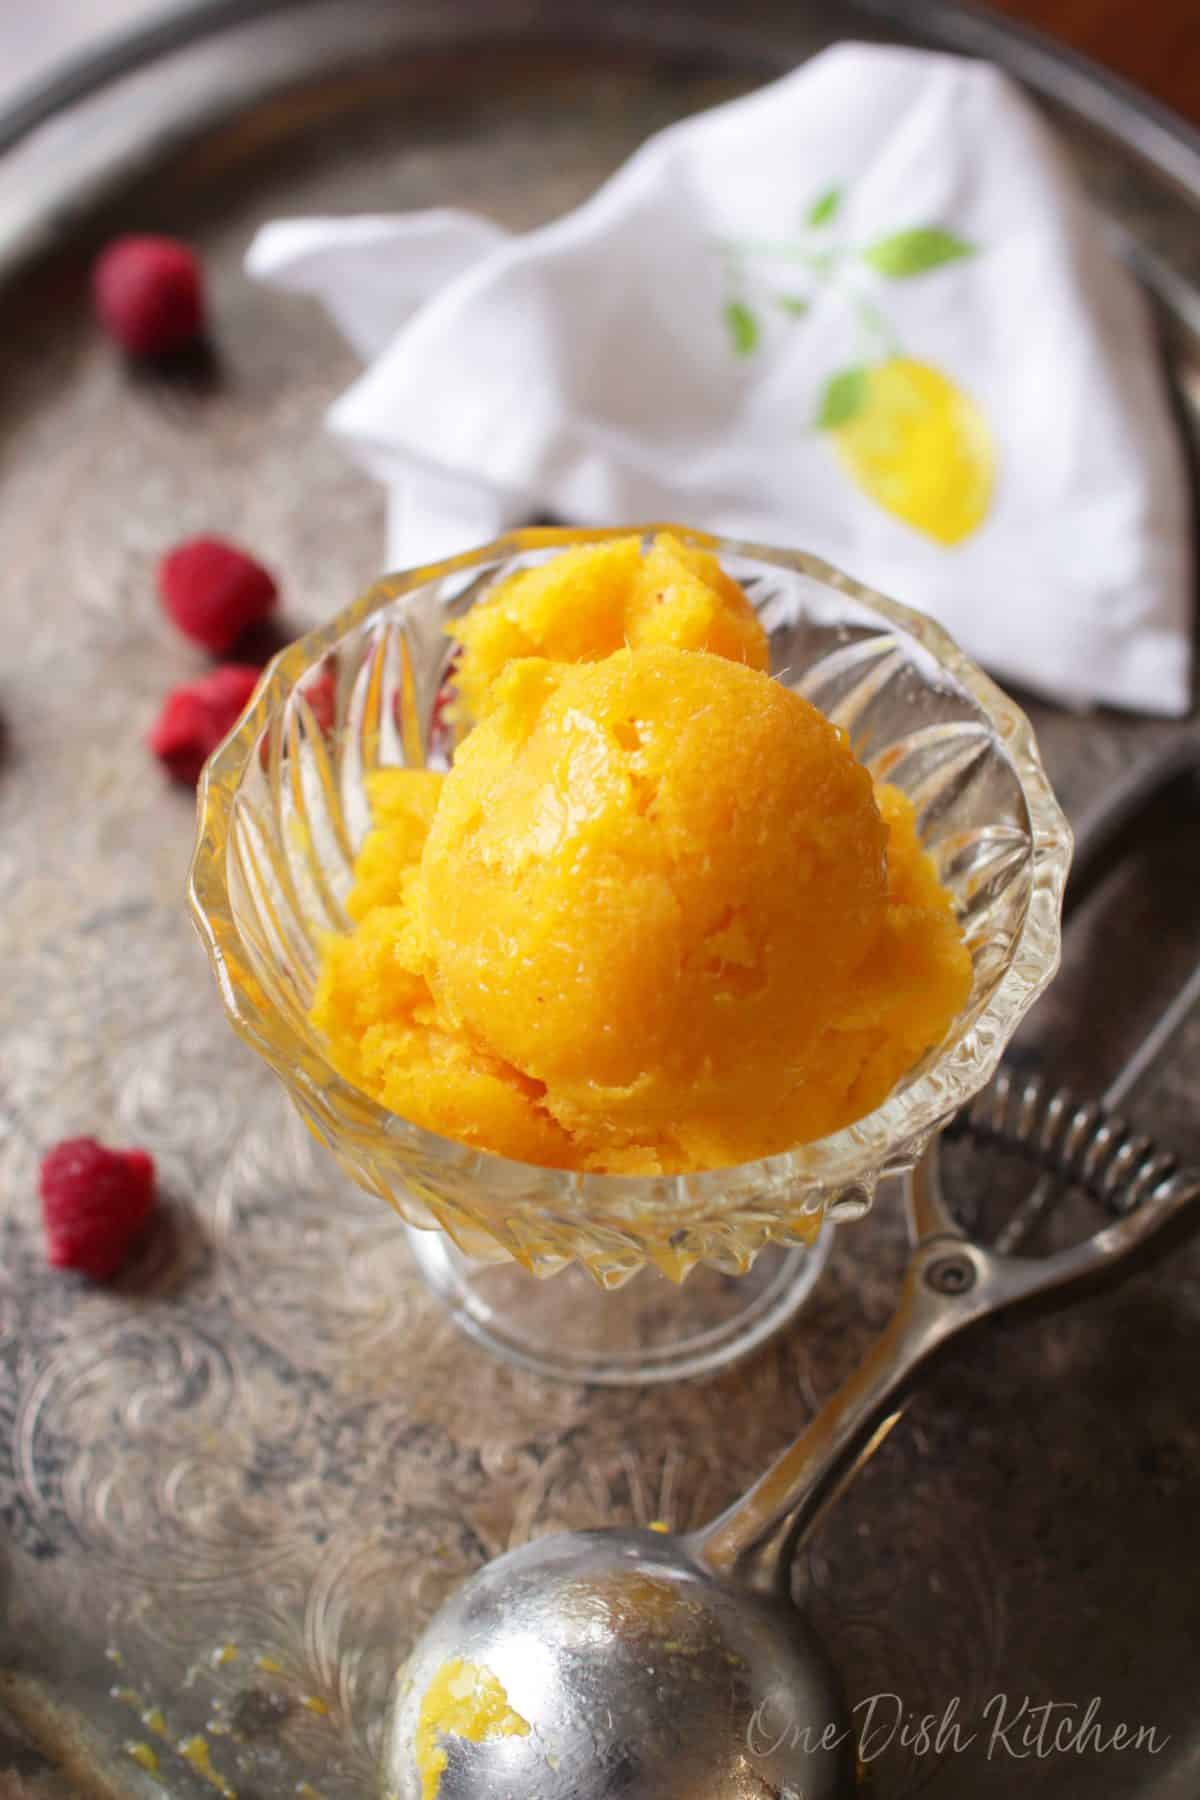 Mango sorbet in a dessert glass on a metal tray next to an ice cream scoop and scattered raspberries.